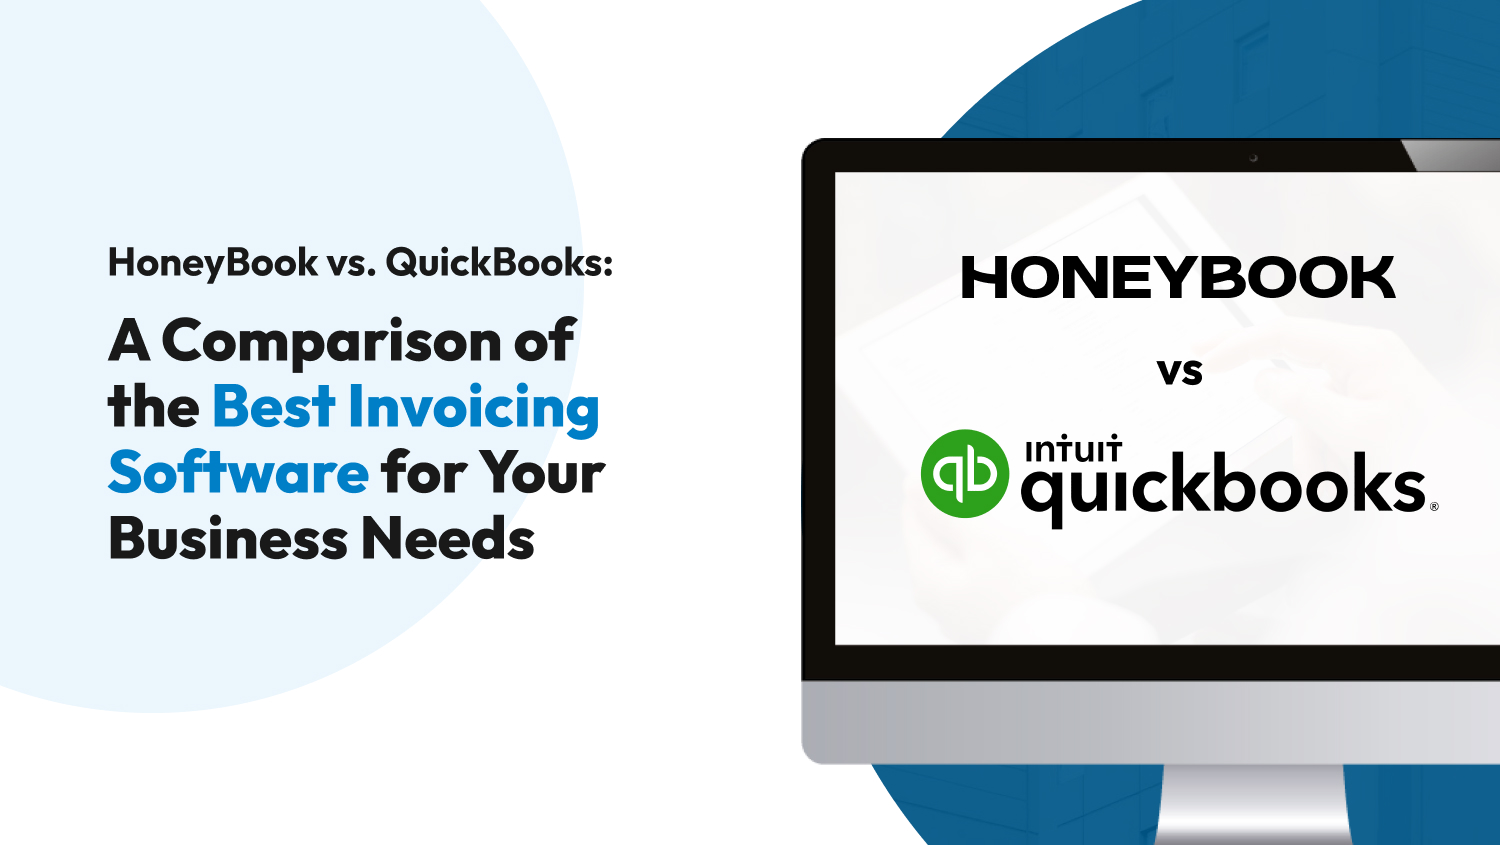 HoneyBook vs. QuickBooks: A Comparison of the Best Invoicing Software for Your Business Needs